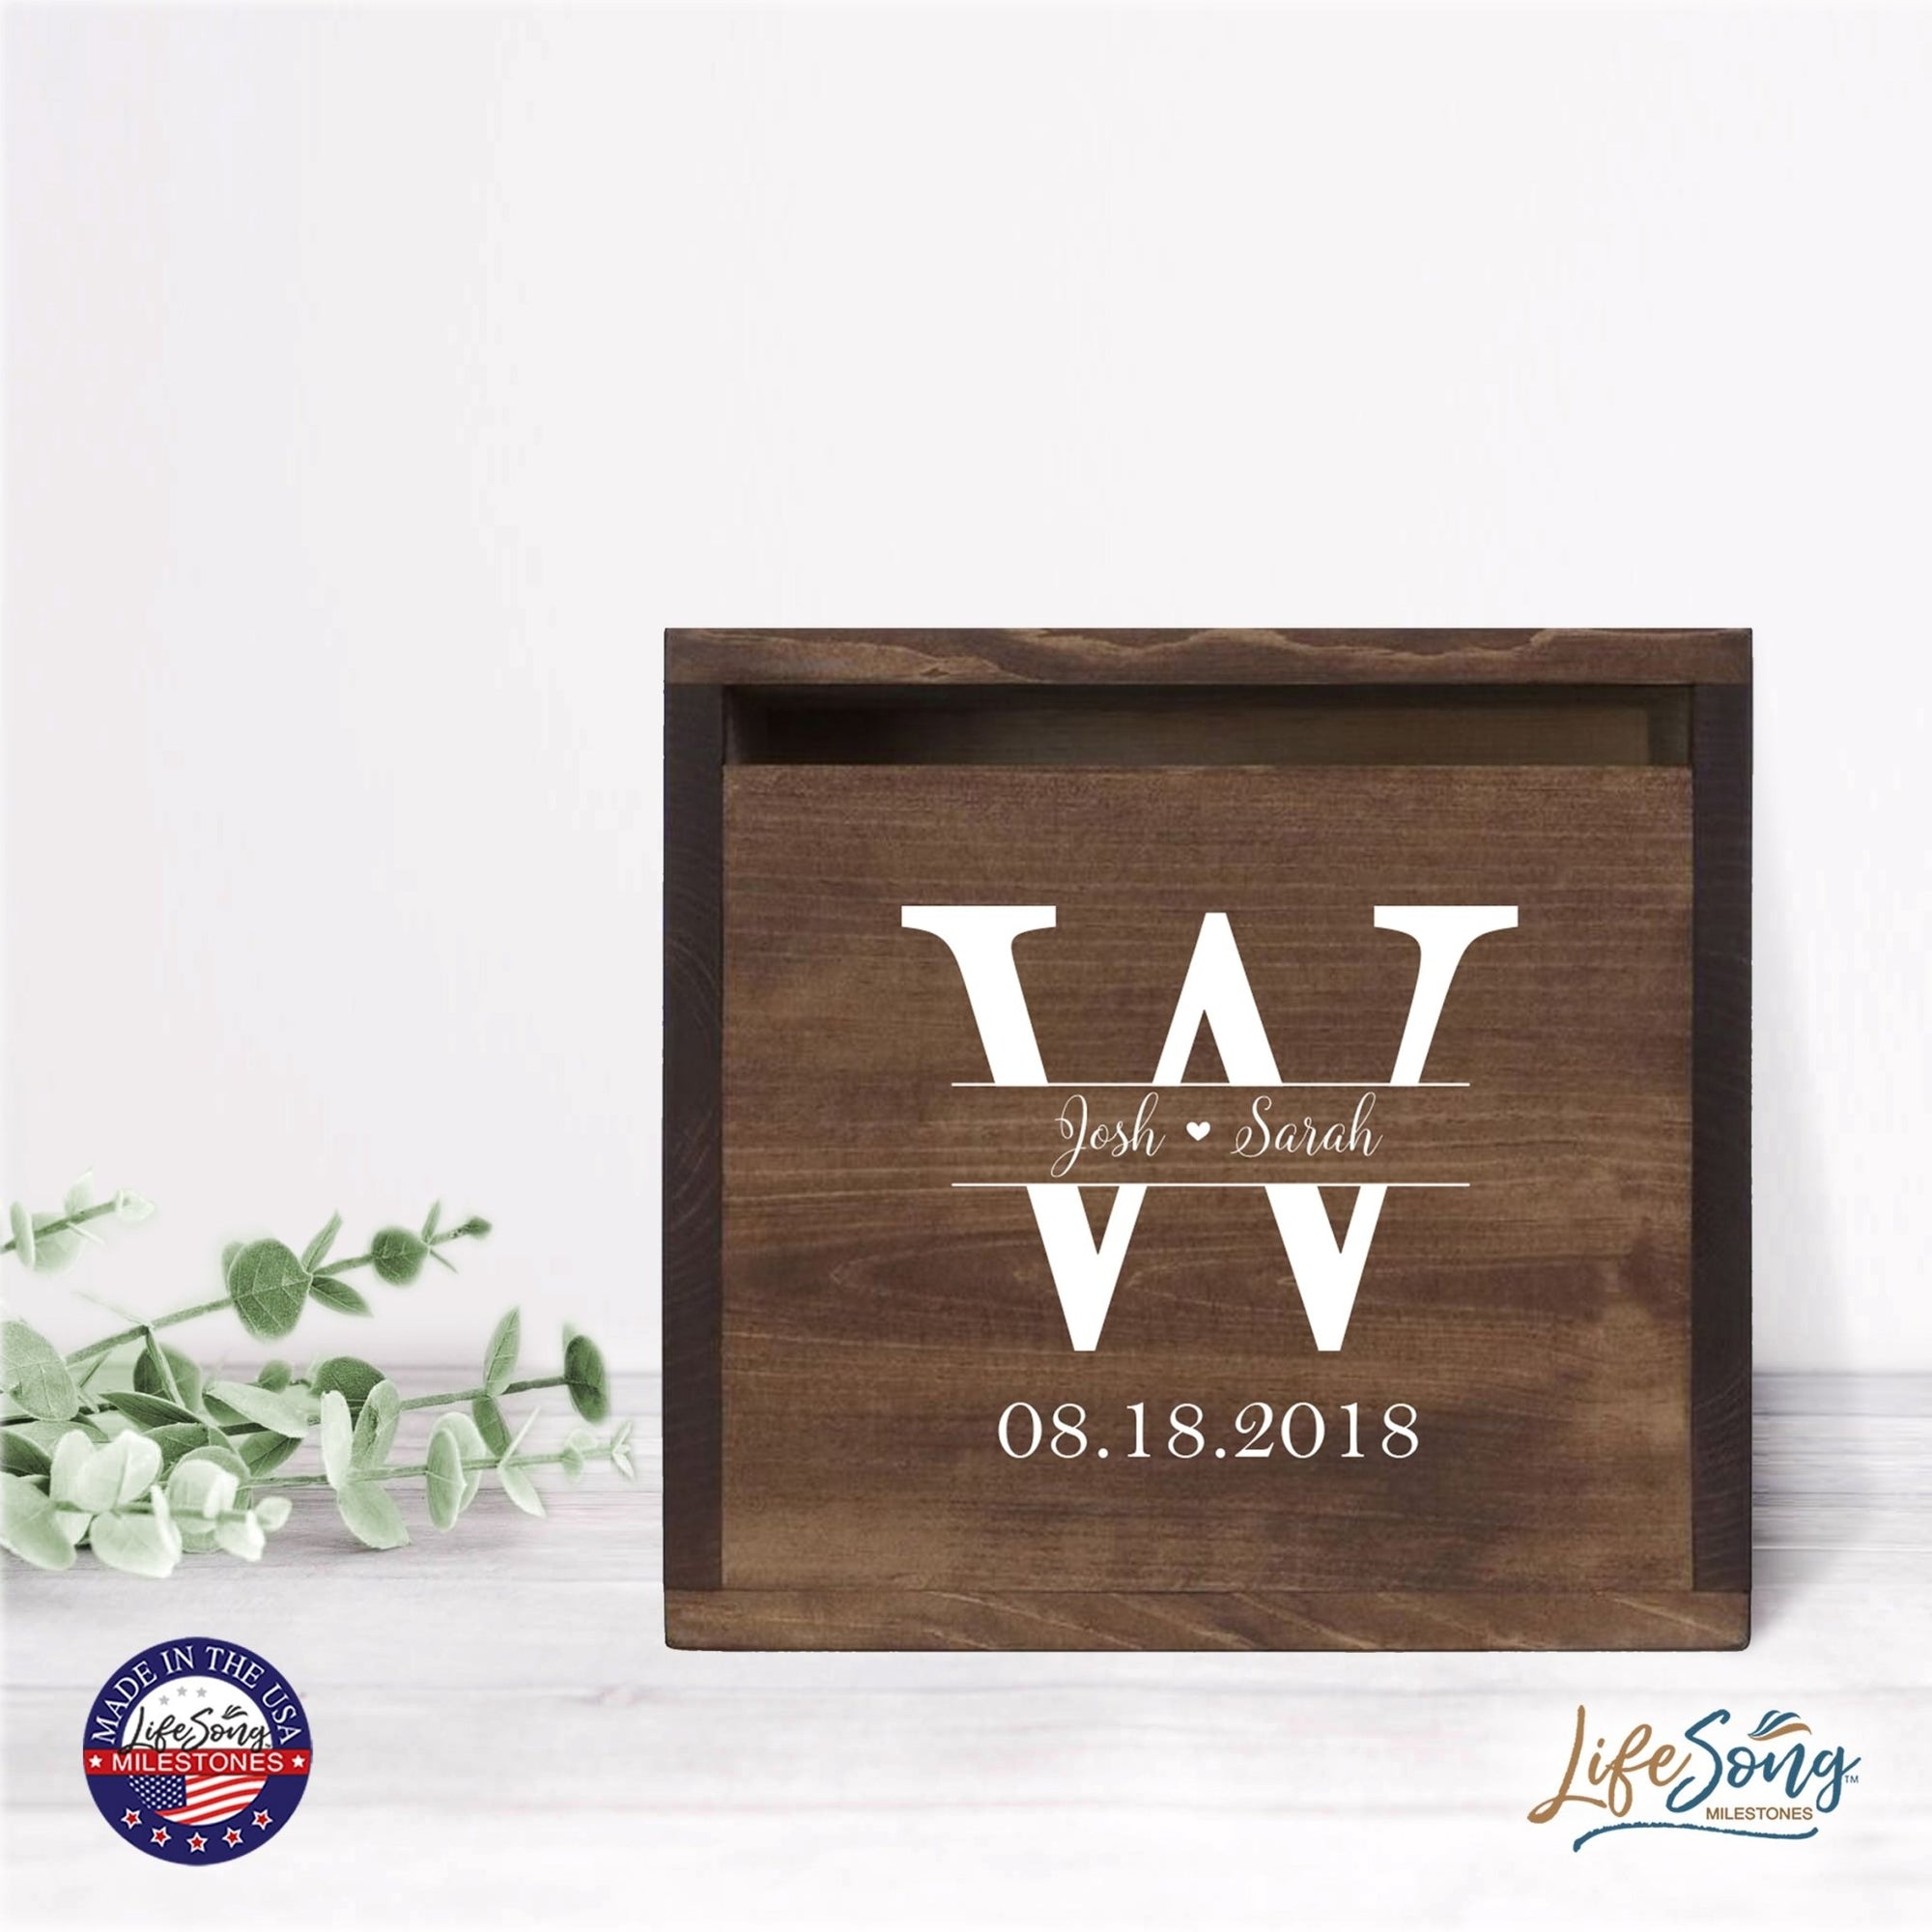 Personalized Wooden Card Box for Wedding Ceremonies, Venues, Receptions, Bridal Showers, and Engagement Parties 13.5x12 - Josh & Sarah (W) - LifeSong Milestones